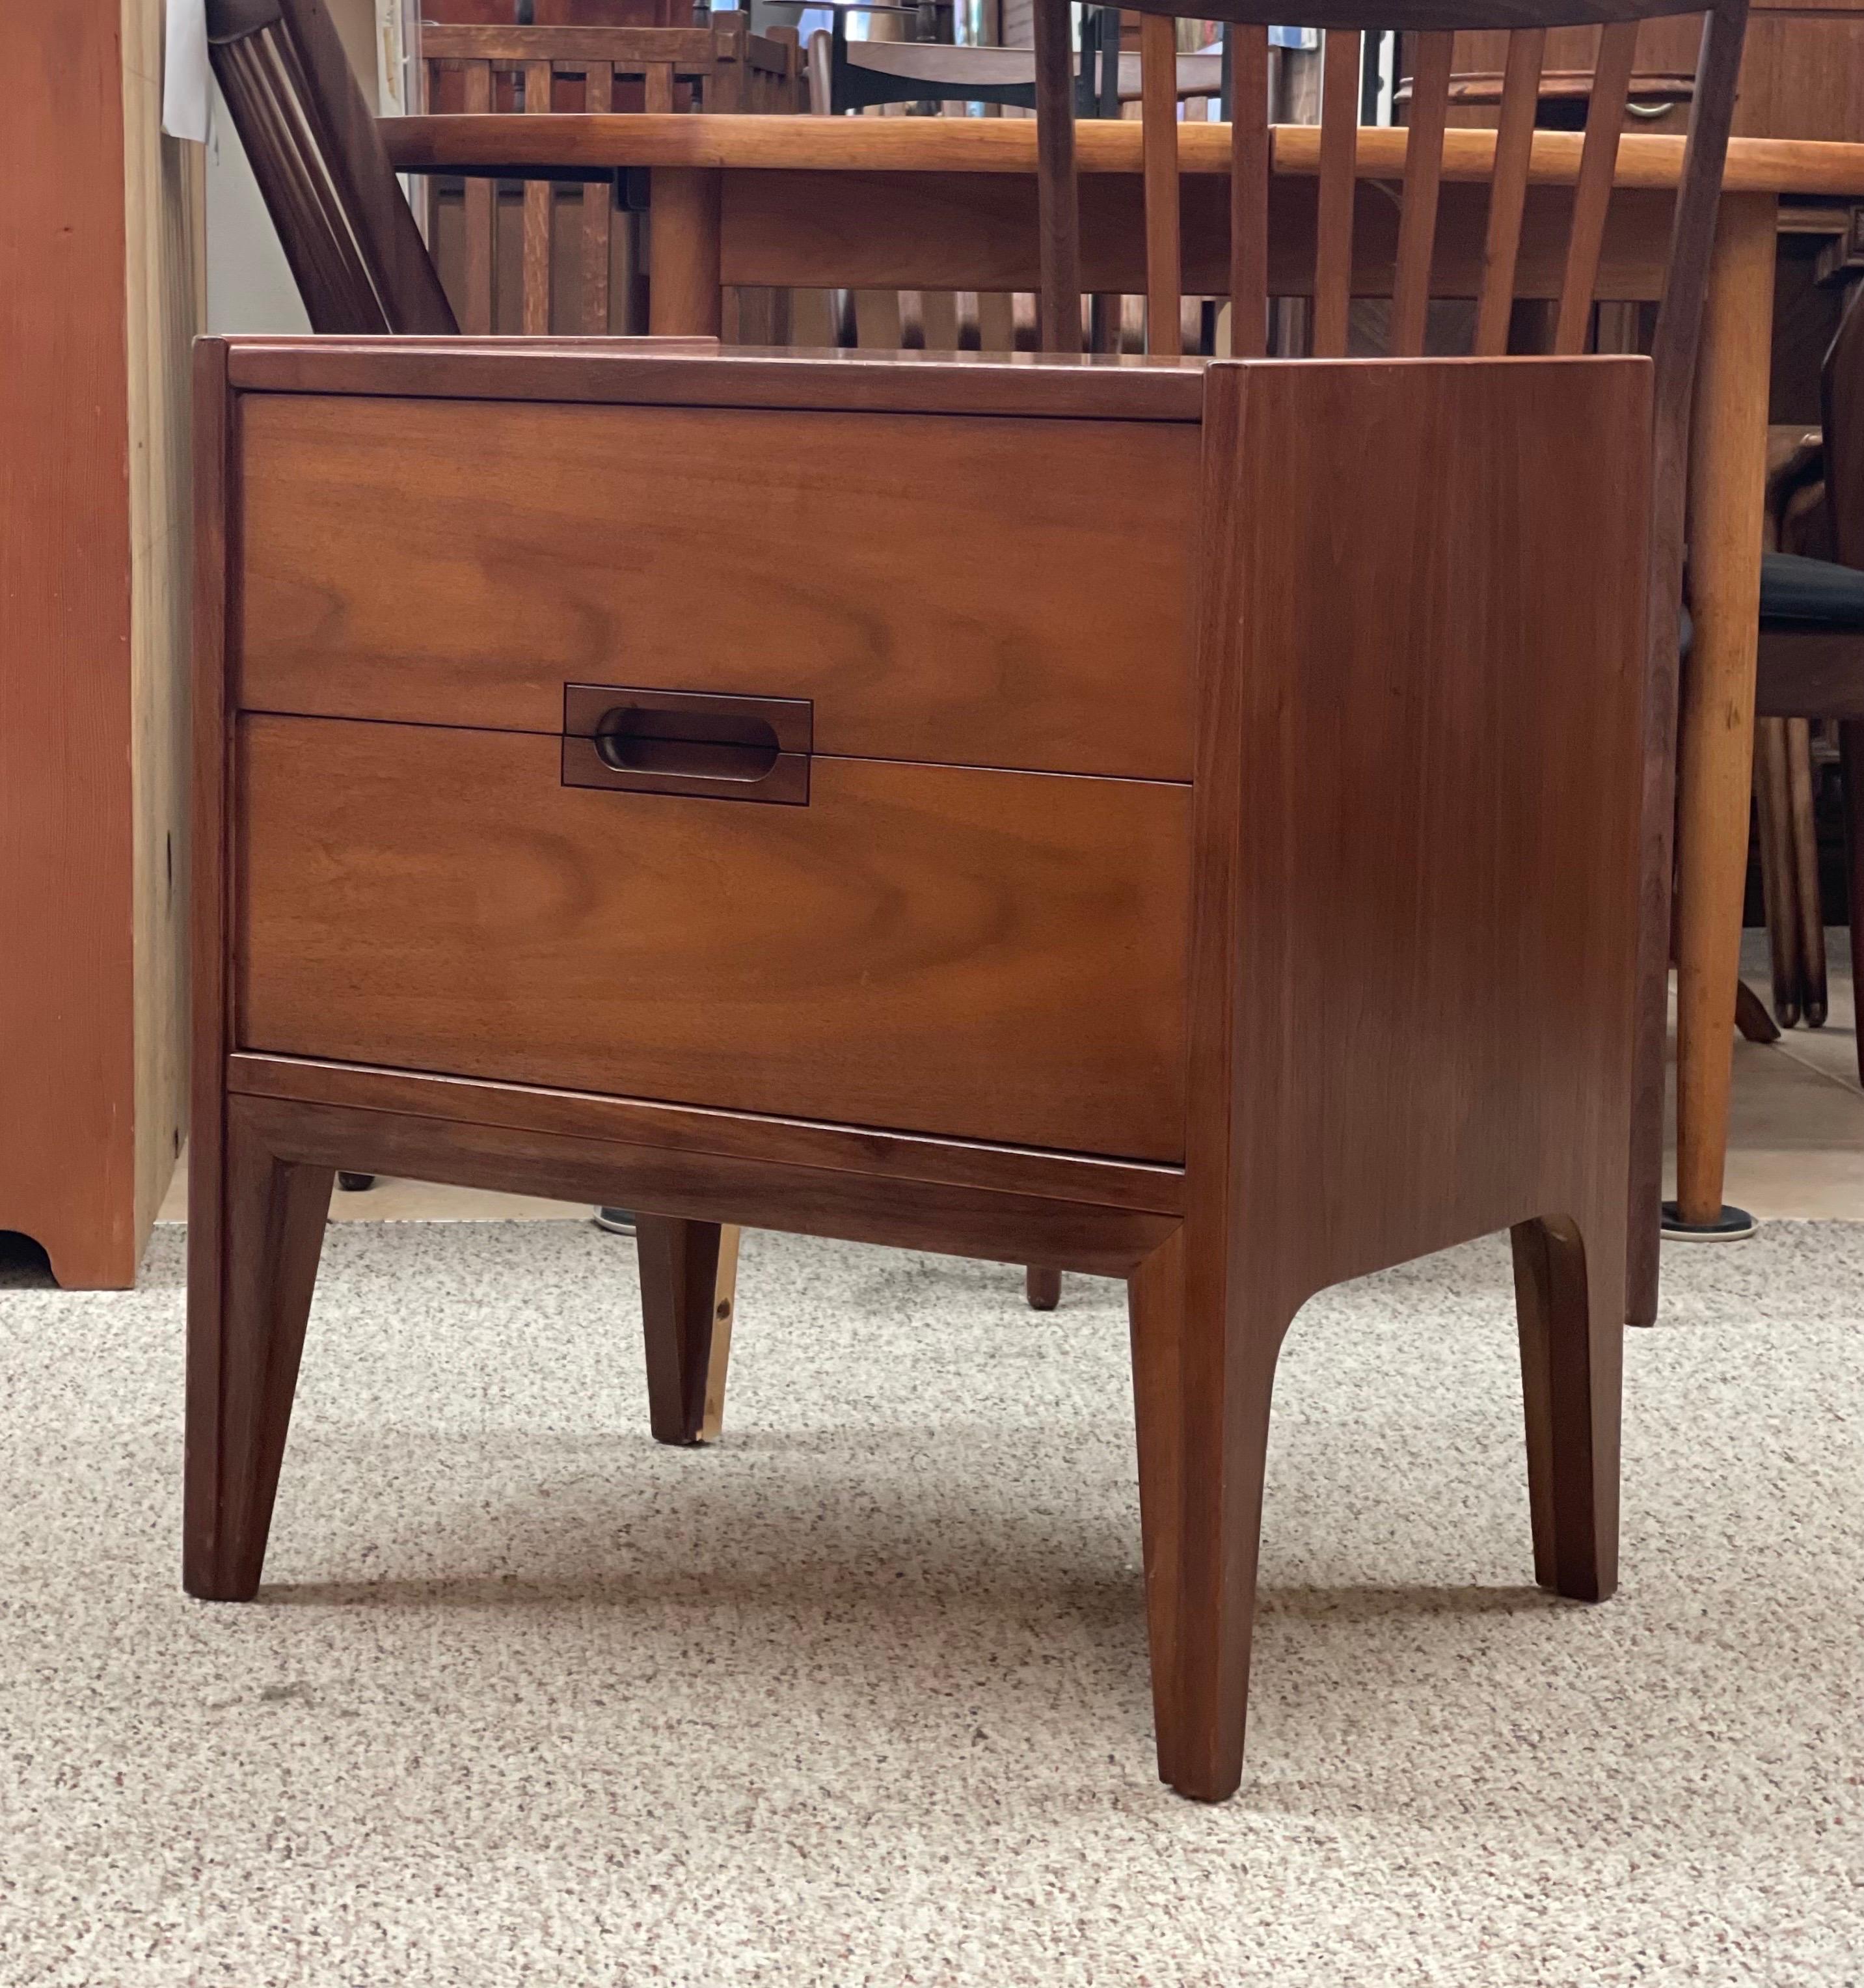 Vintage Mid-Century Modern Accent Tables Dovetail Drawers For Sale 2